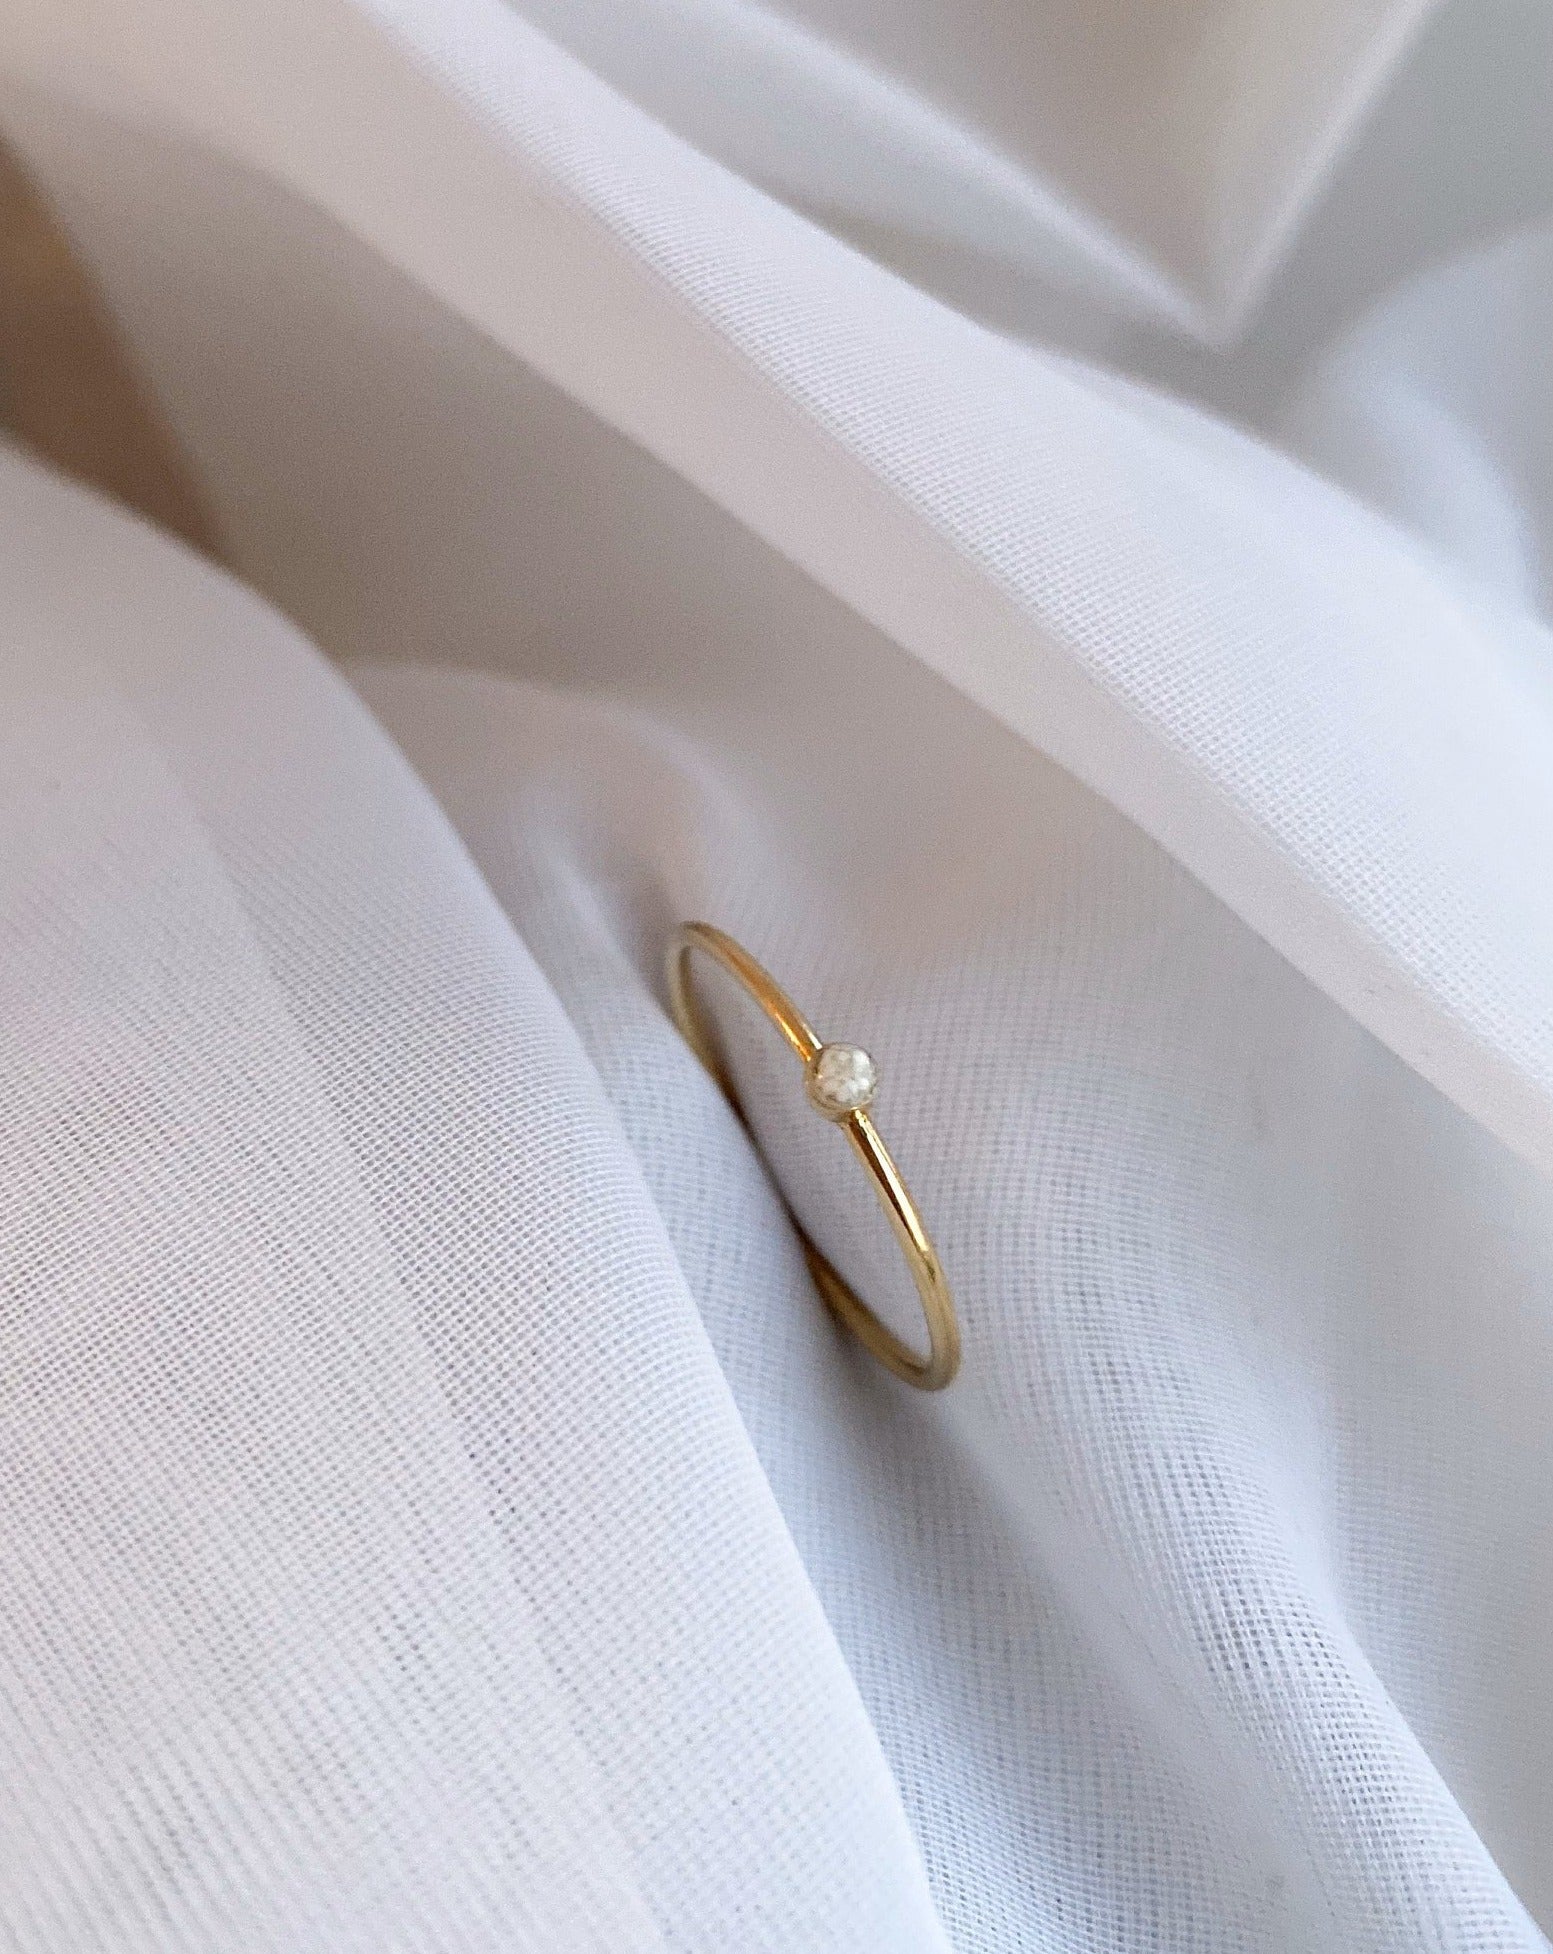 Memorial Ash Ring - High Quality 14/20 Gold Filled - Tarnish resistant - Made to last - skinny ring - cremation jewelry with pet ashes